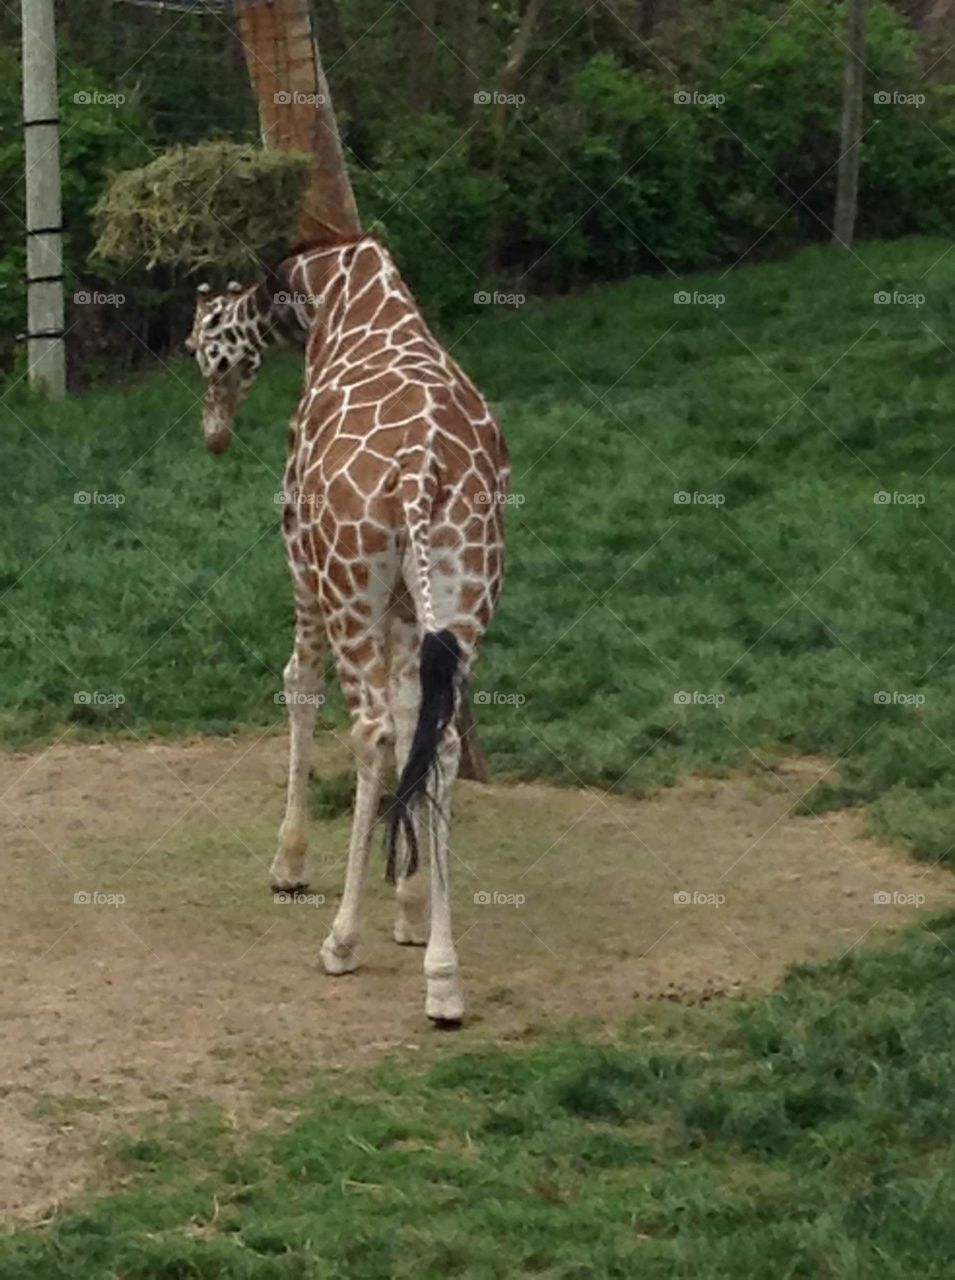 This giraffe is scratching an itch on the back of his neck.